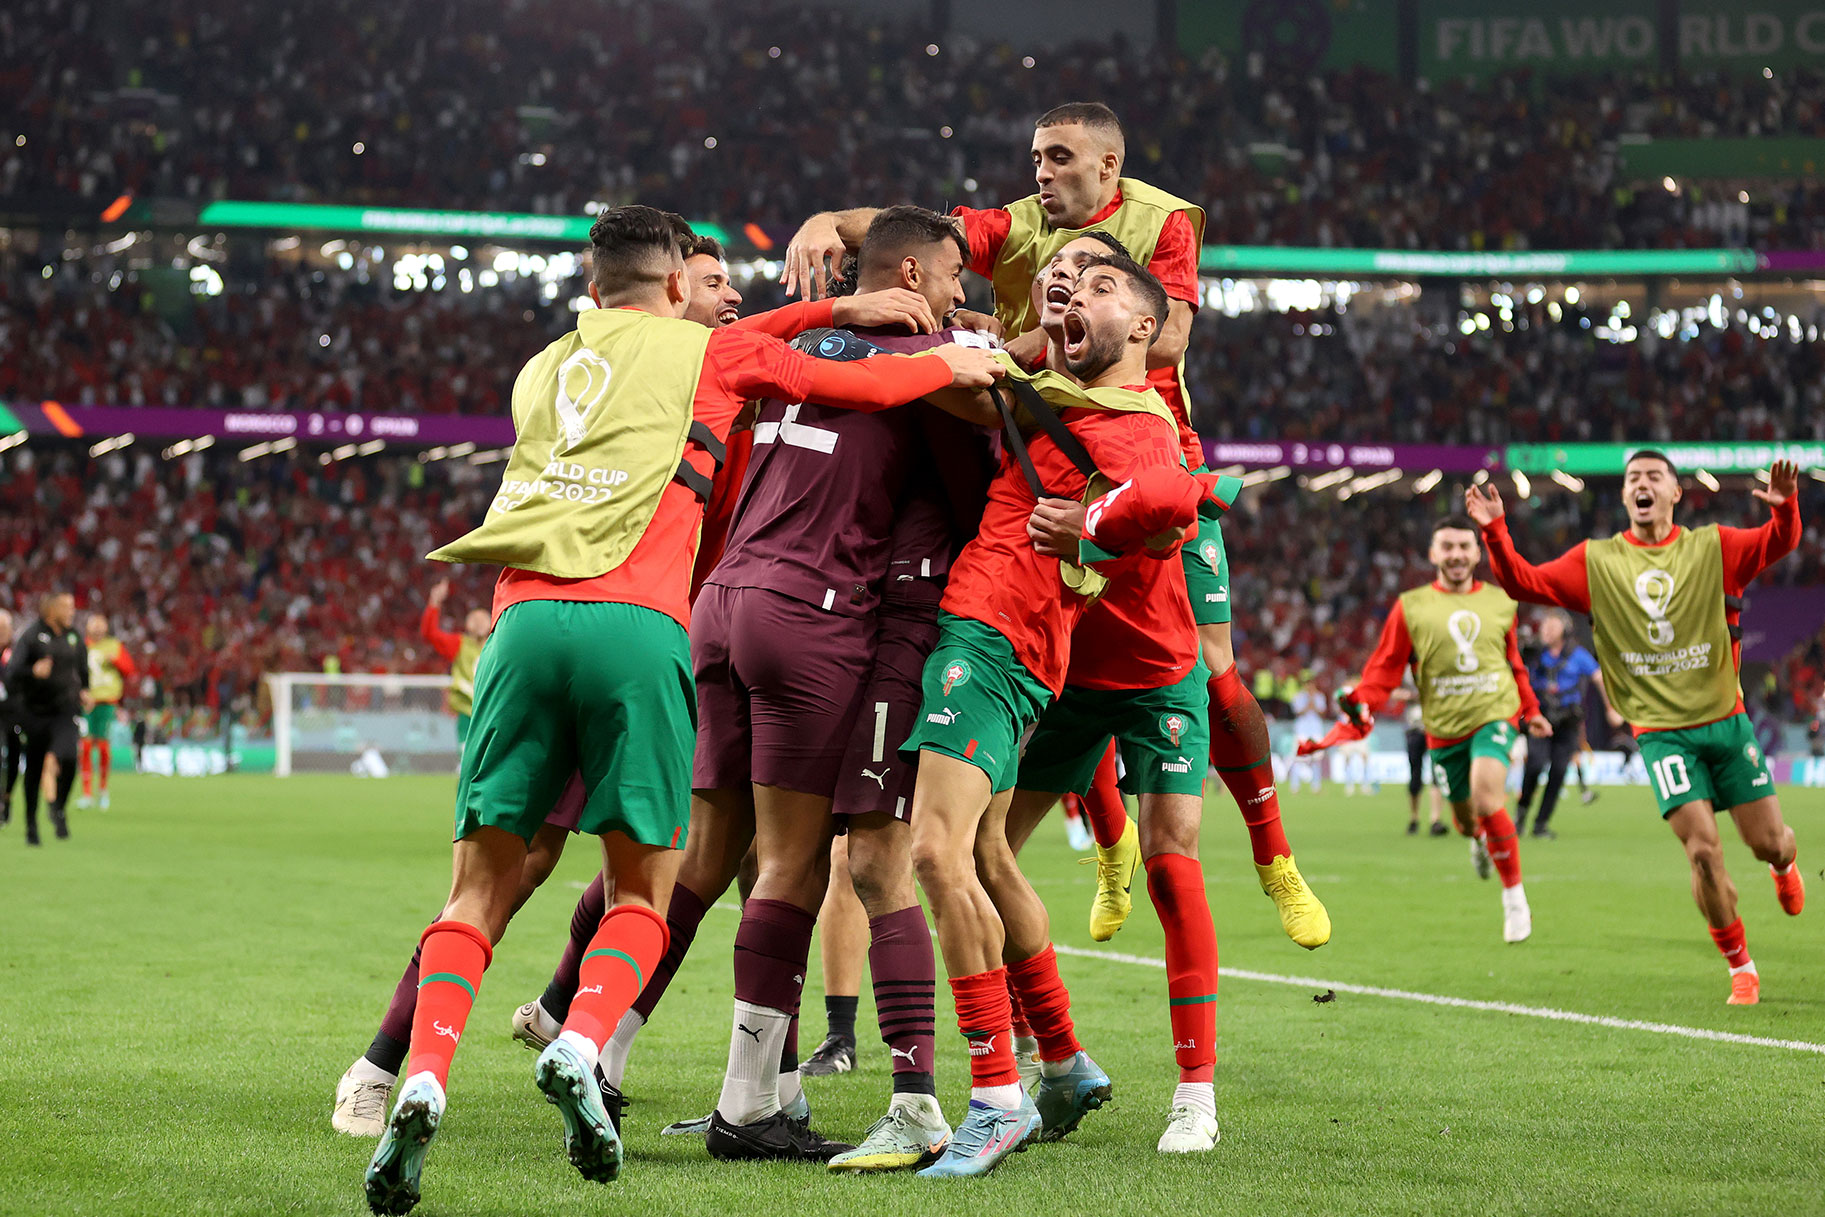 Morocco players celebrates after the team's victory in the penalty shoot out during the FIFA World Cup Qatar 2022 Round of 16 match between Morocco and Spain